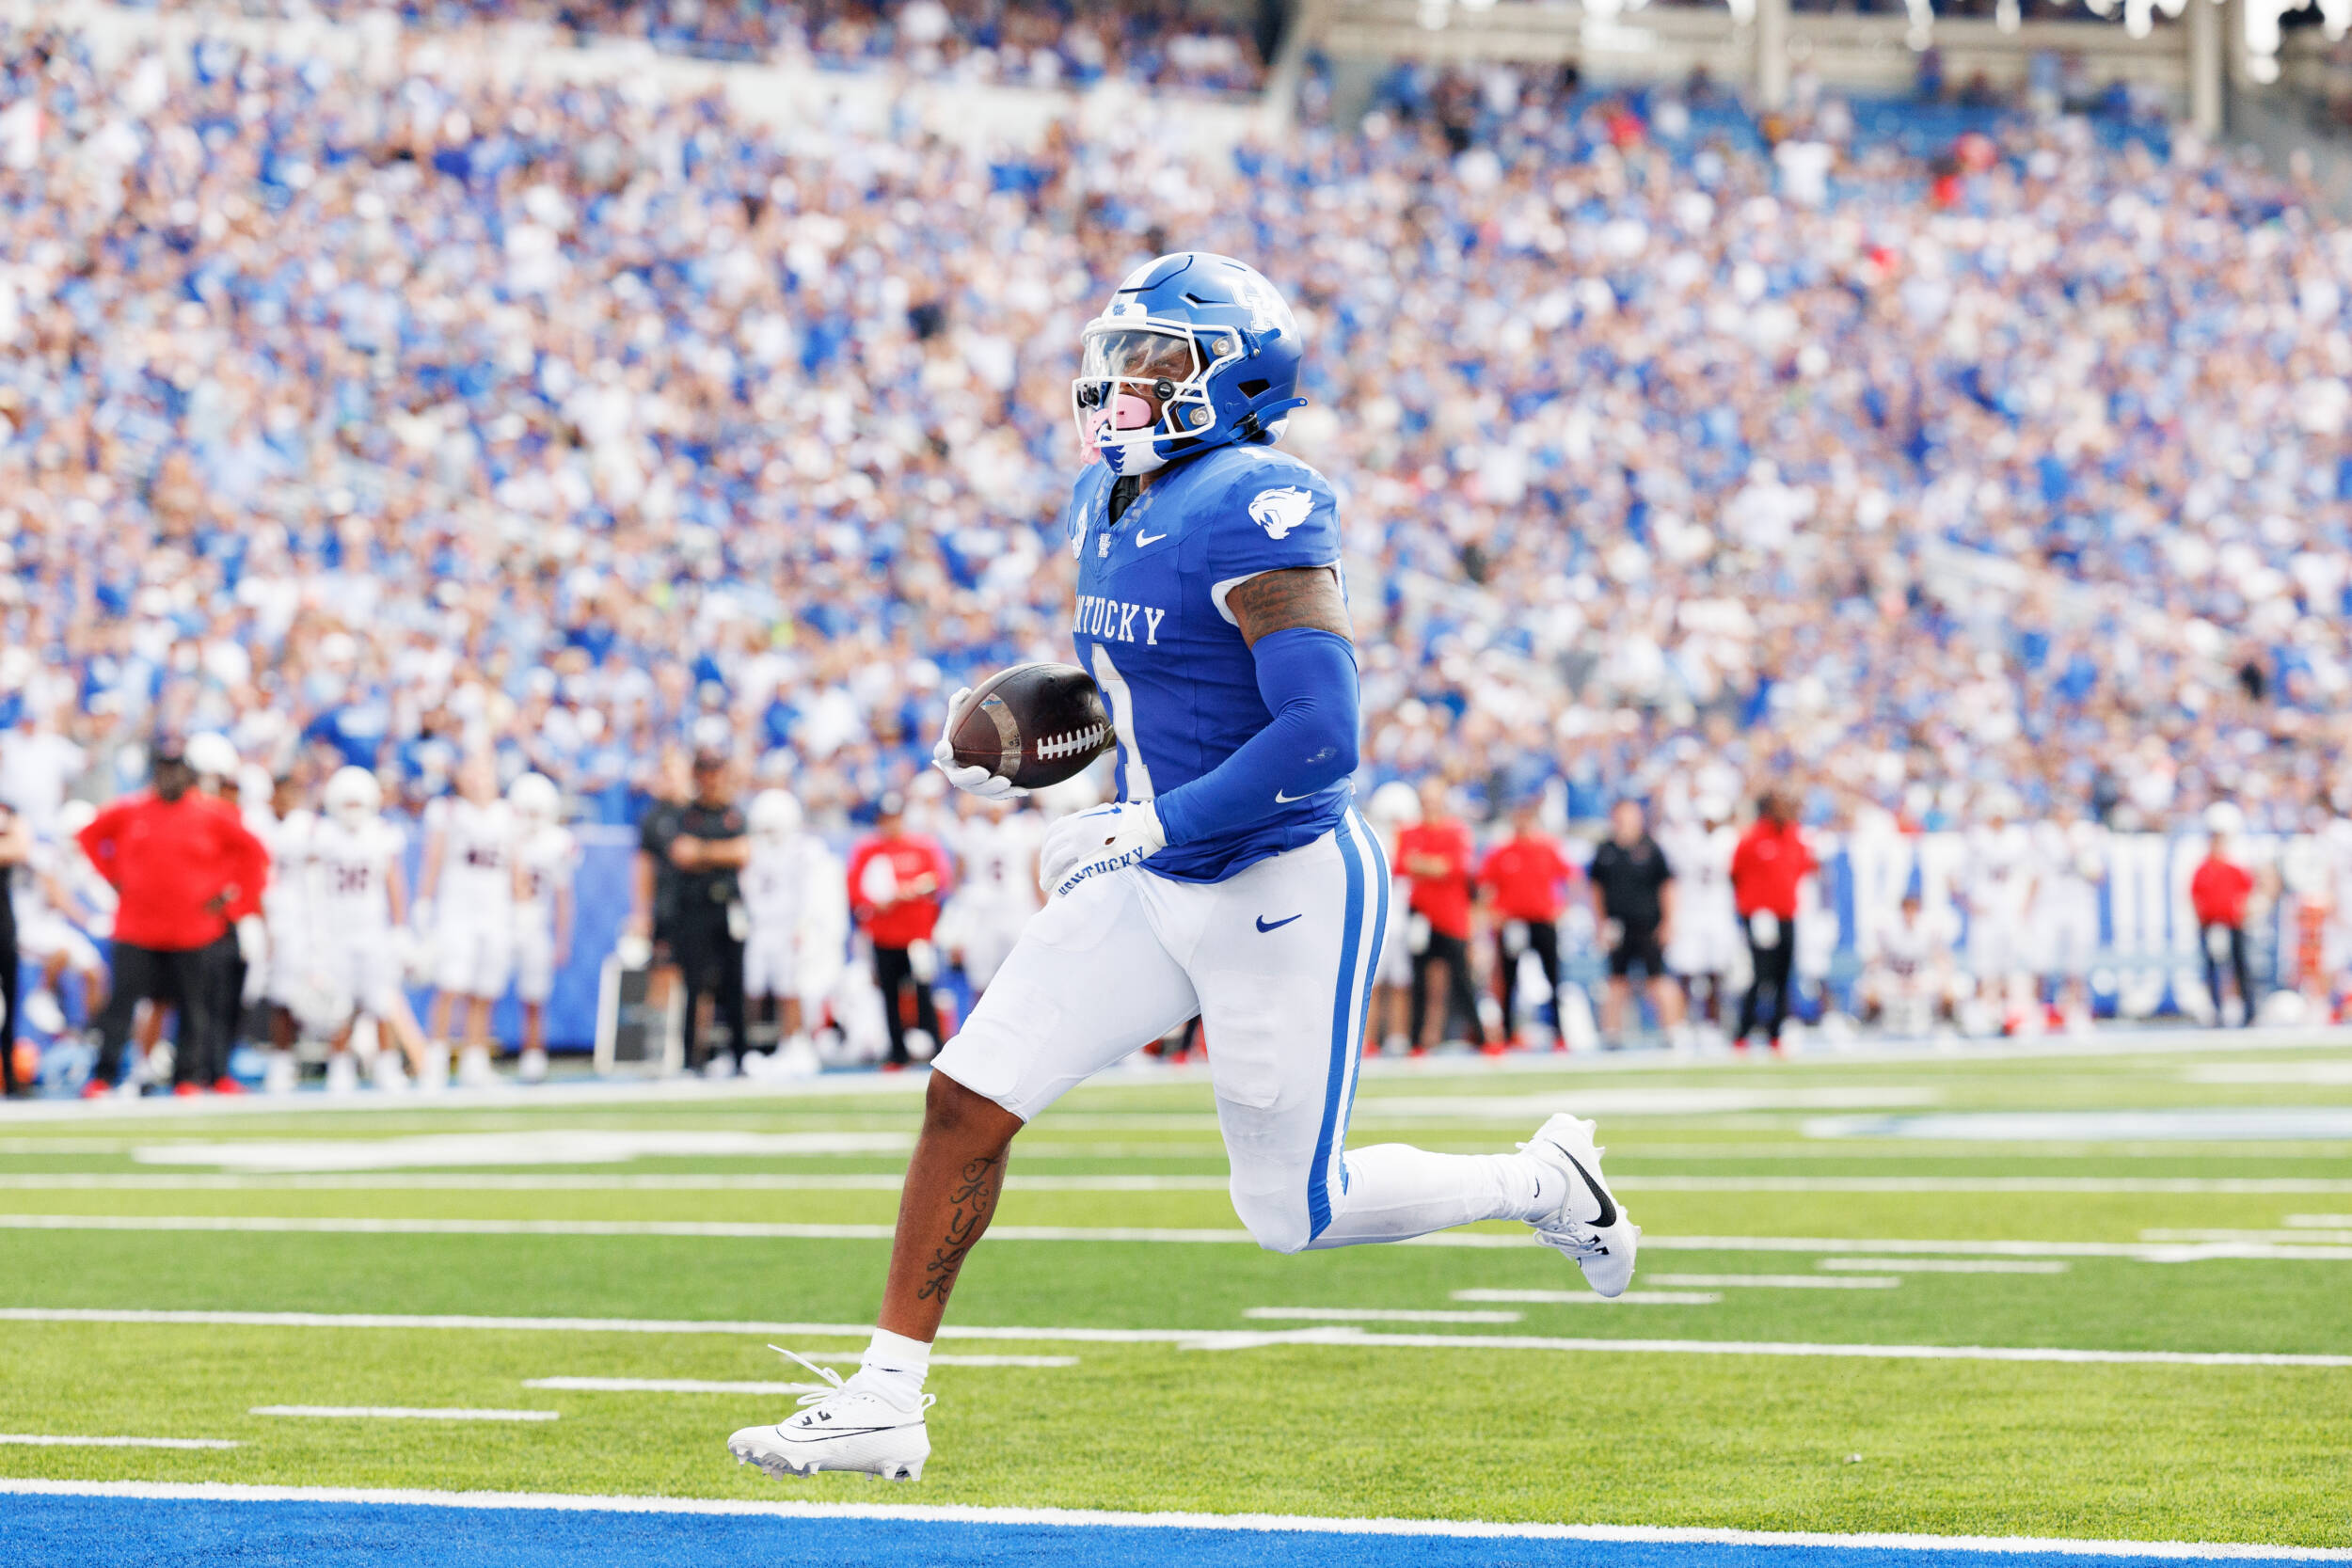 Coen, UK Offense 'Hungry' Heading Into Week 2